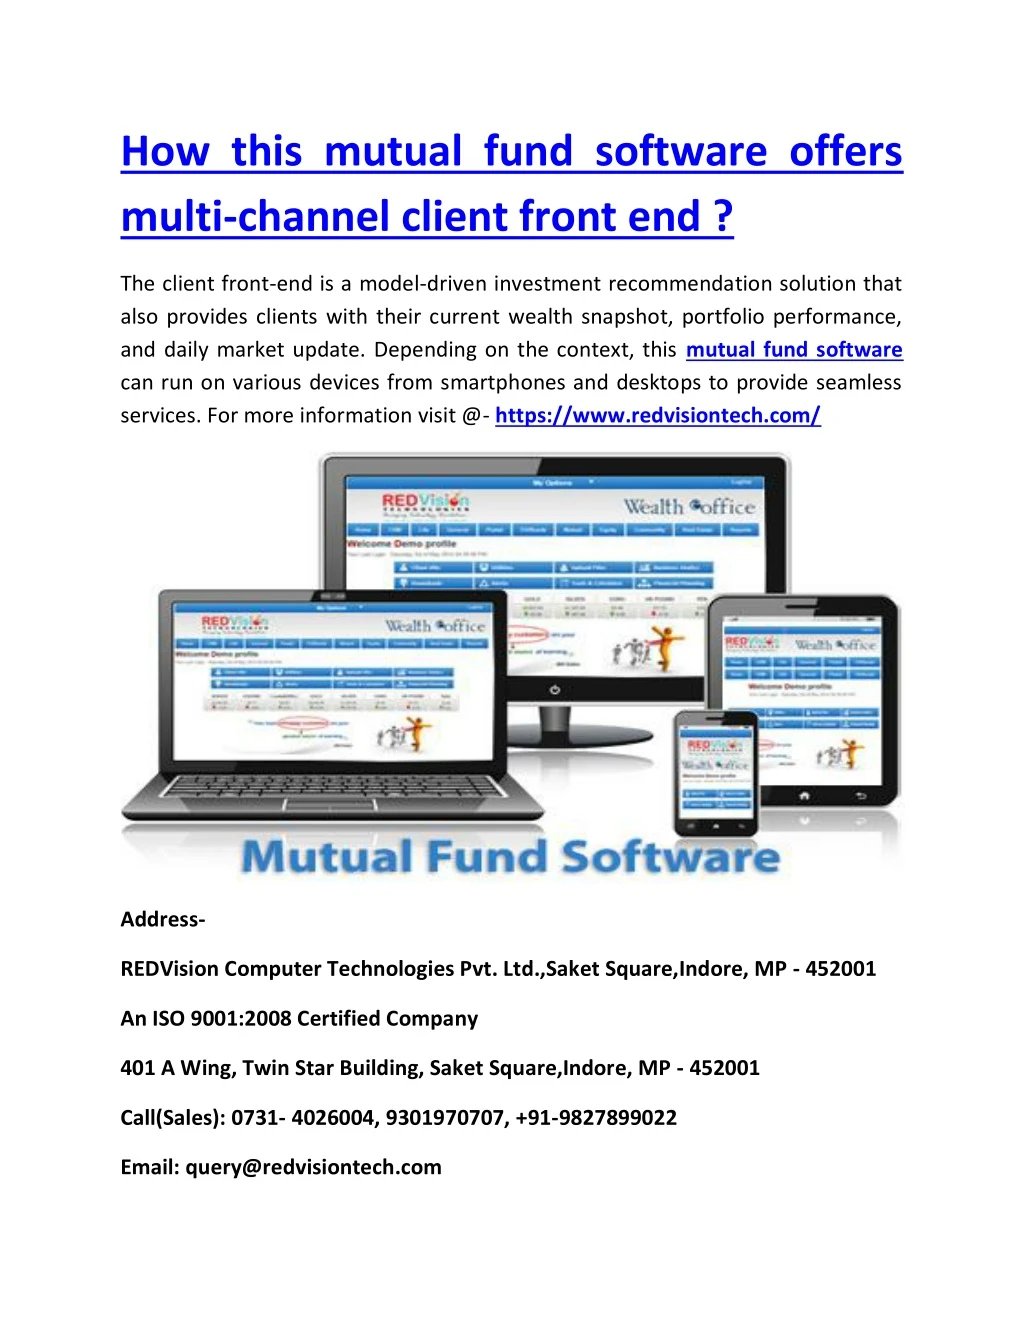 how this mutual fund software offers multi